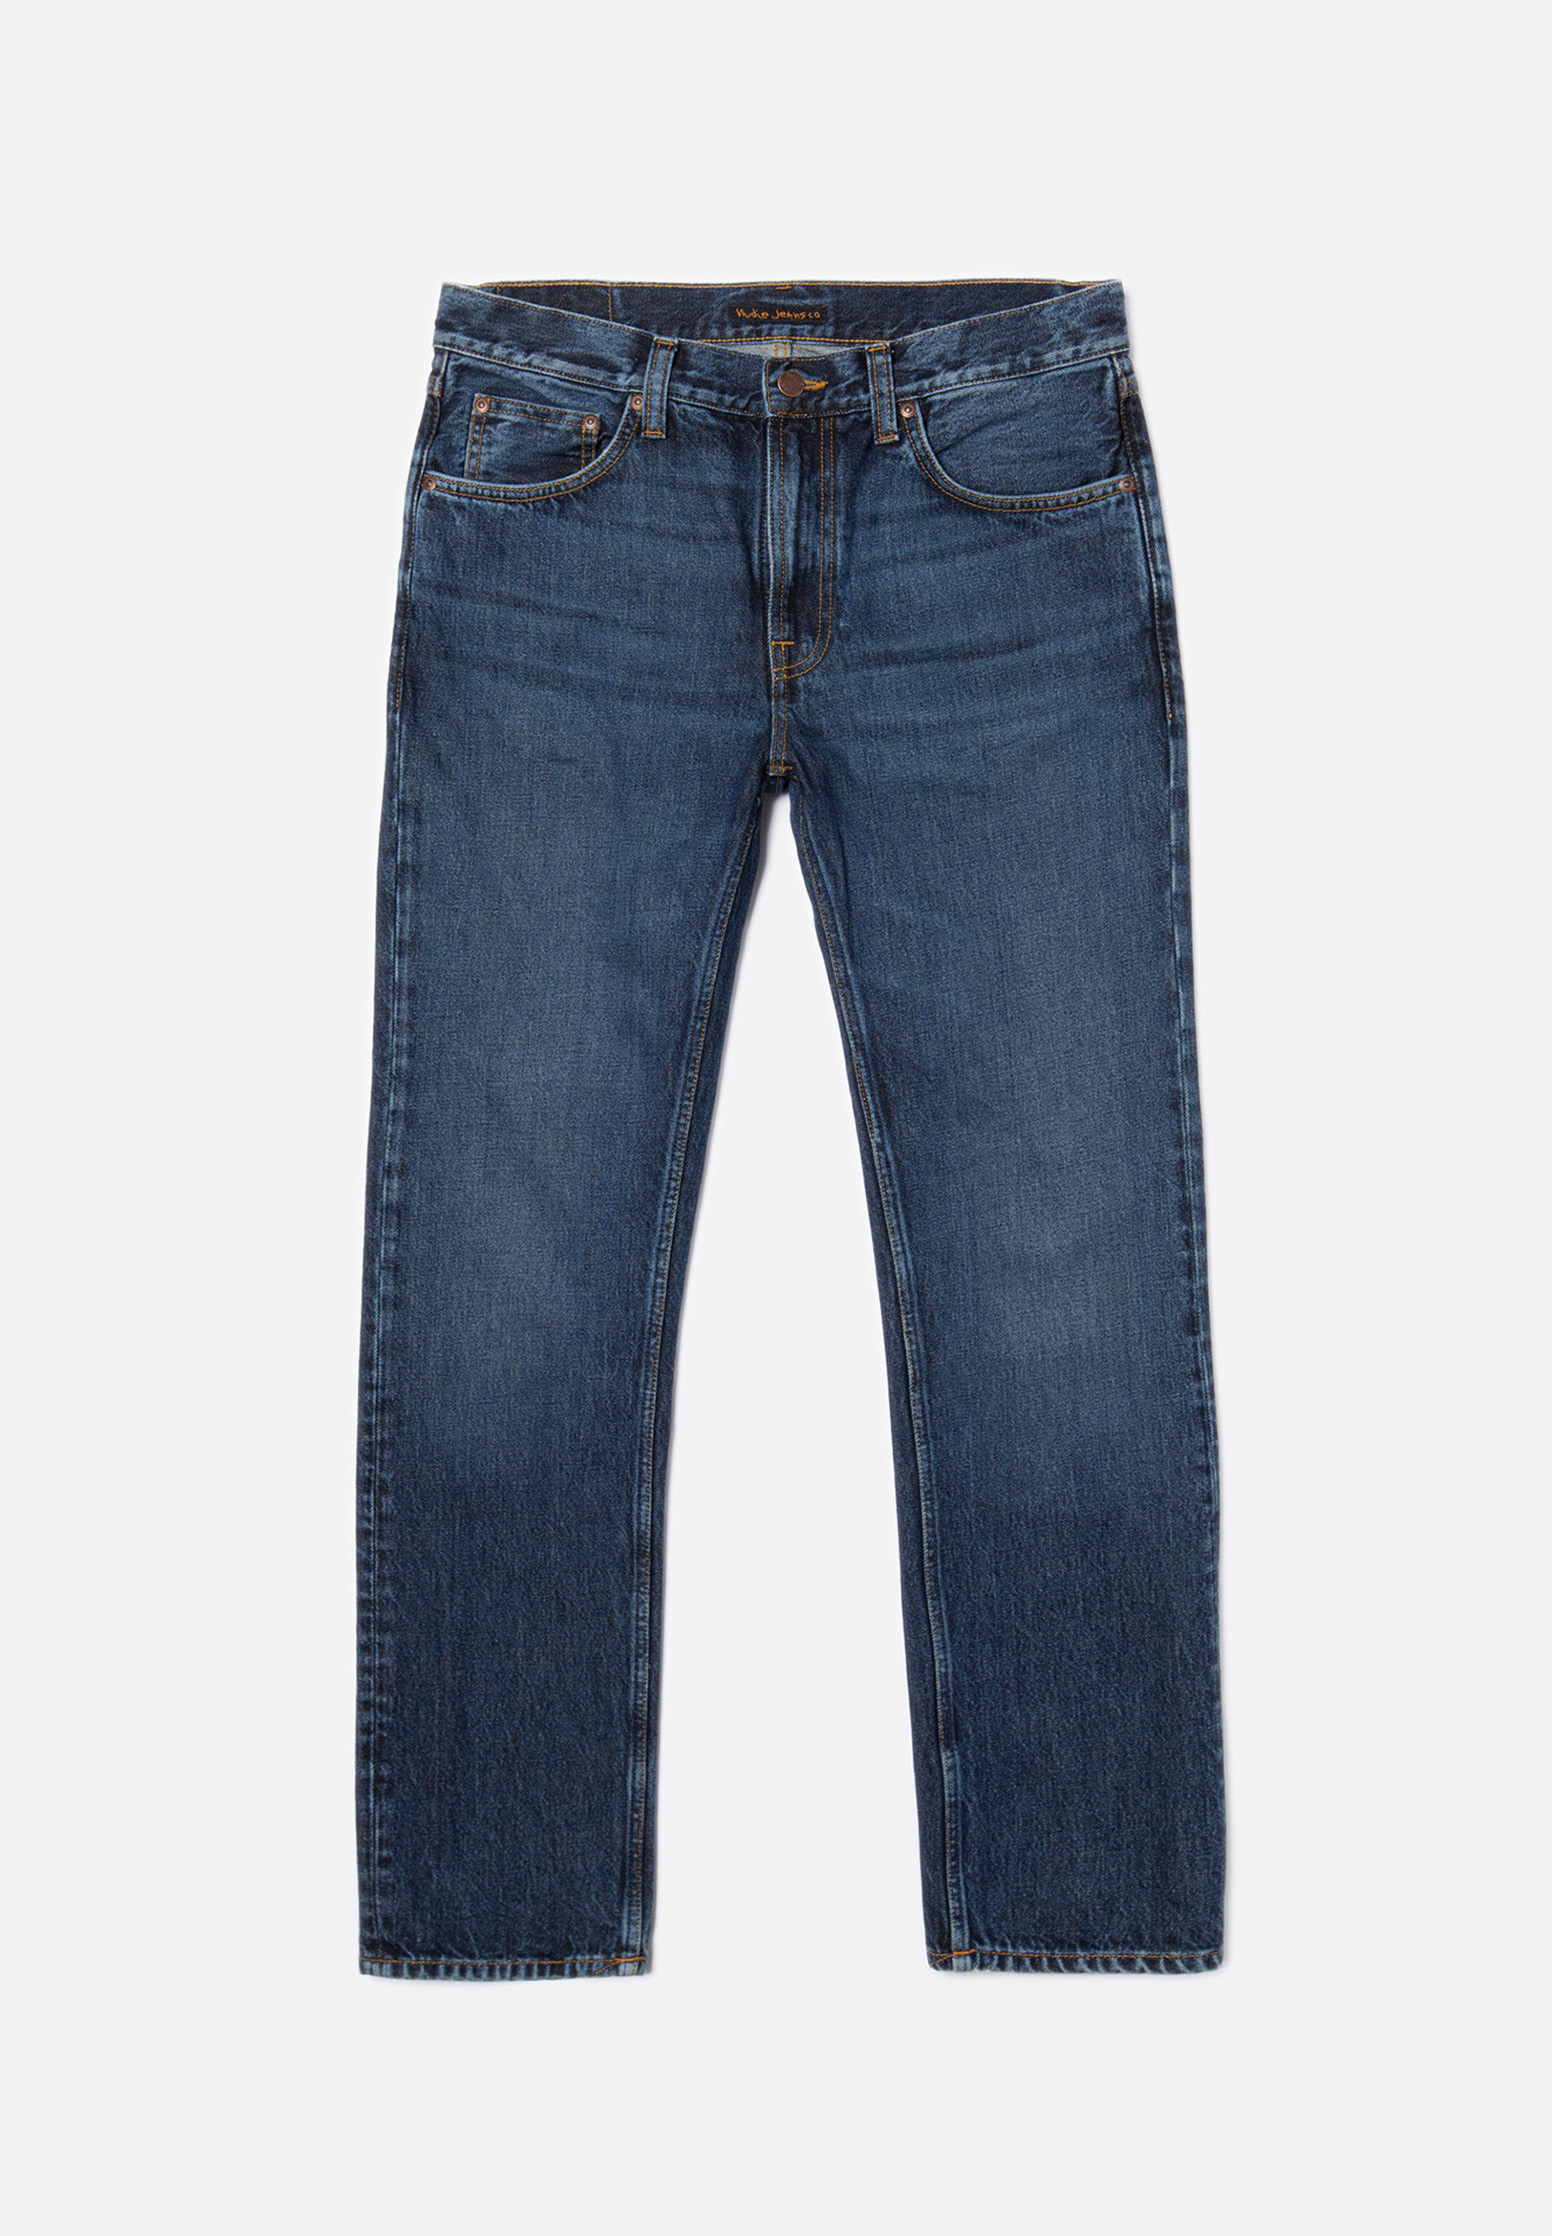 NUDIE JEANS Jeans Gritty Jackson blue soil 29/30